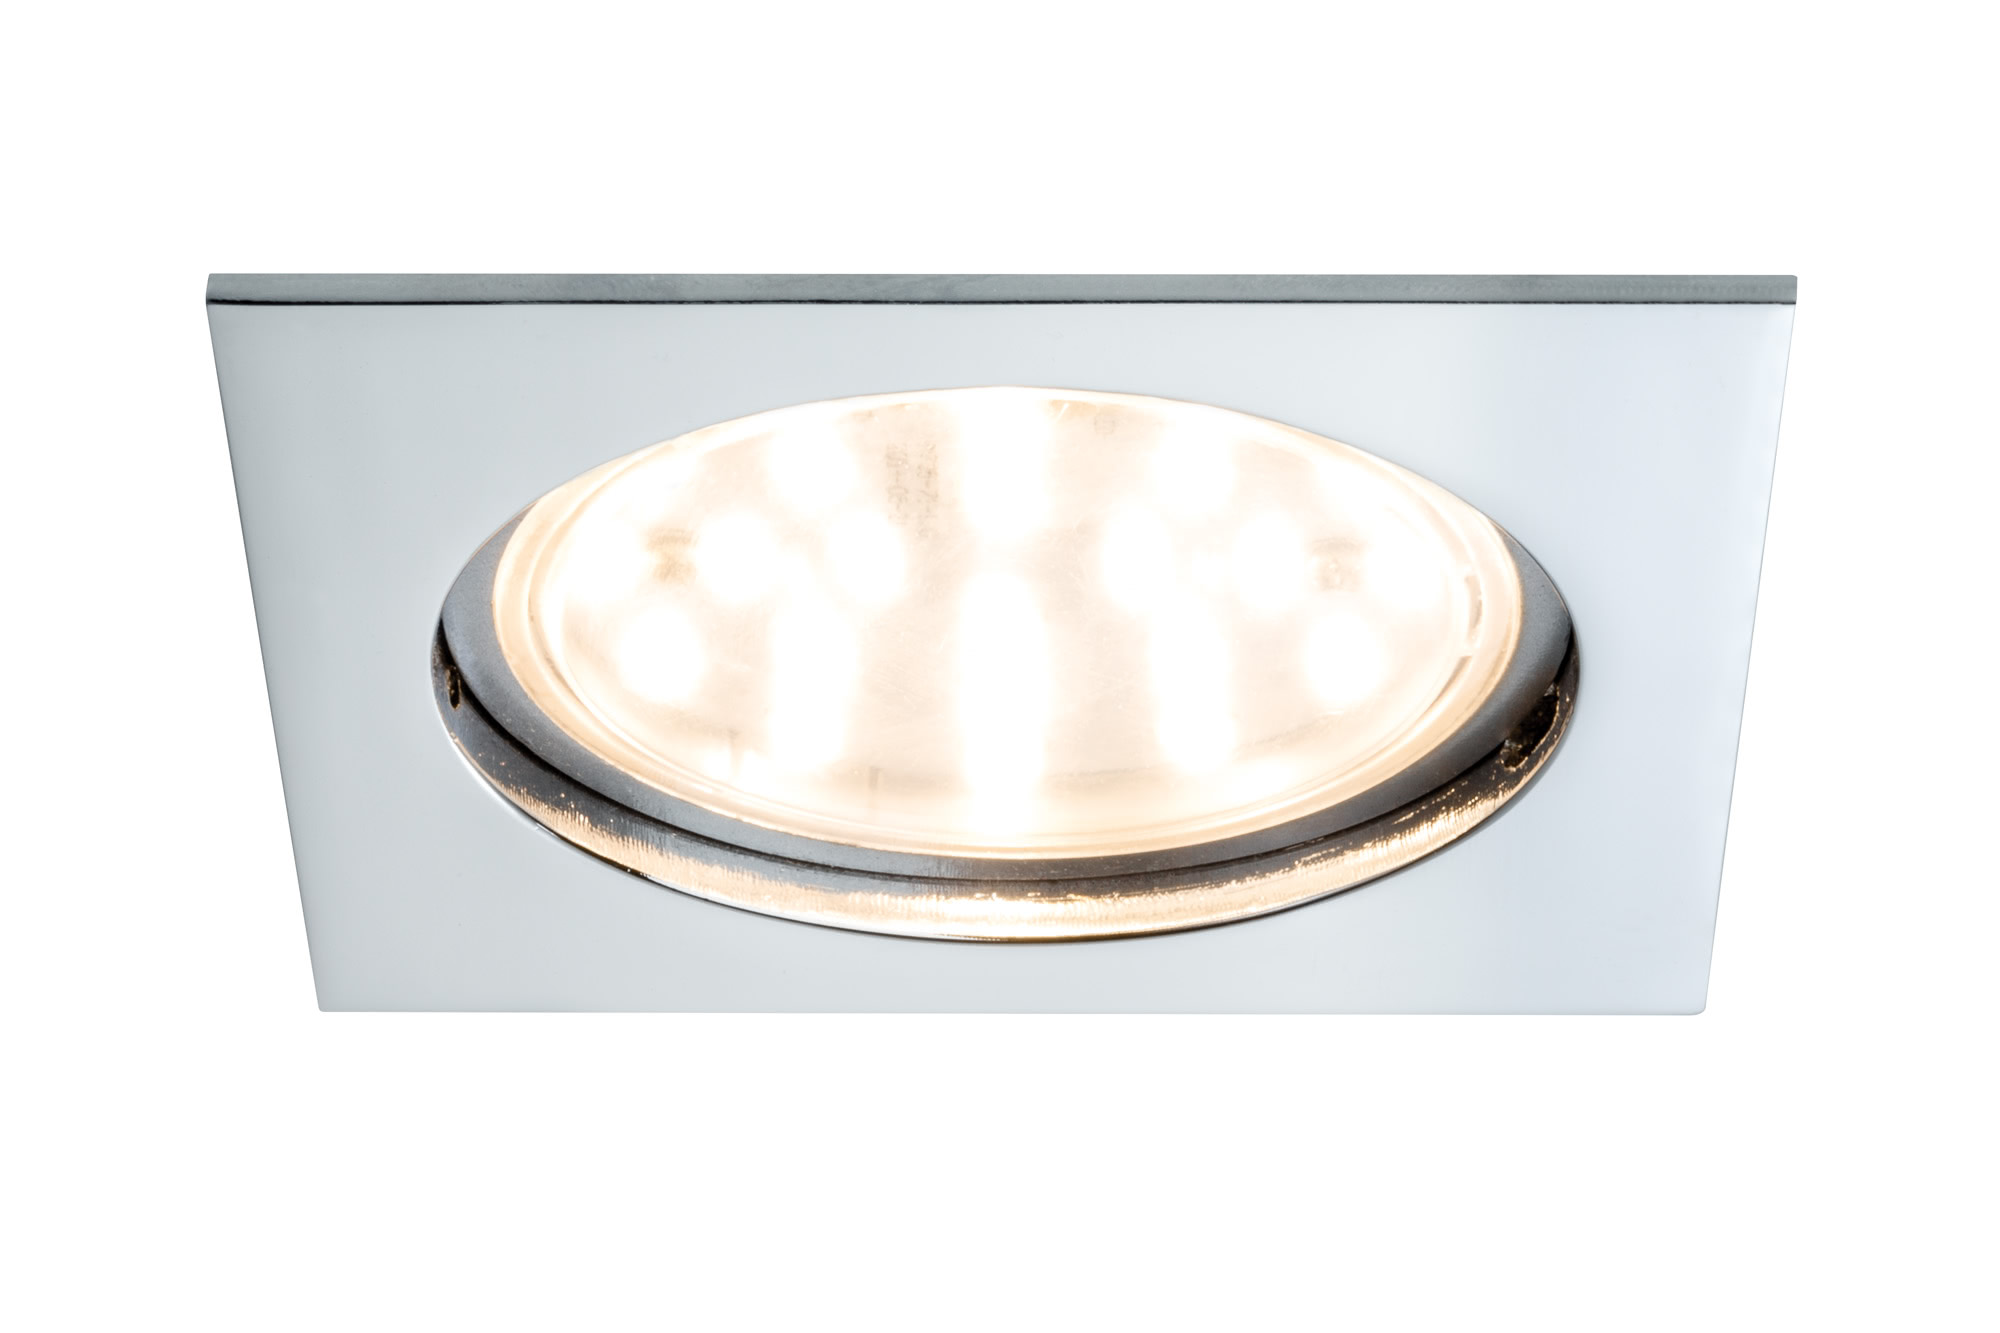 Recessed luminaire LED Coin clear rectangular 14W chrome 1-piece set, dimmable